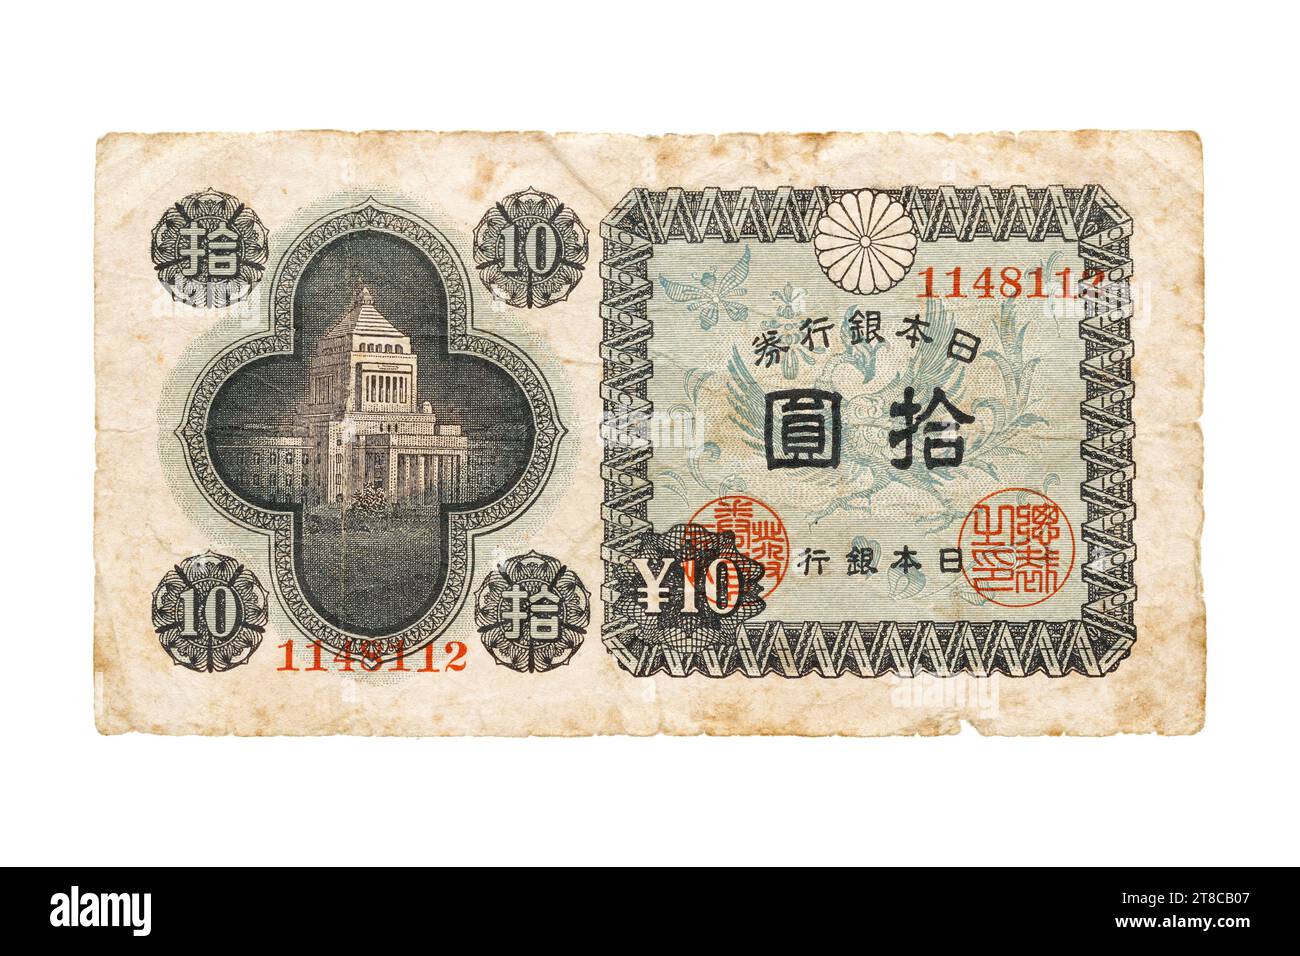 Rare two thousand japanese yen bill that is no longer in circulation Stock Photo